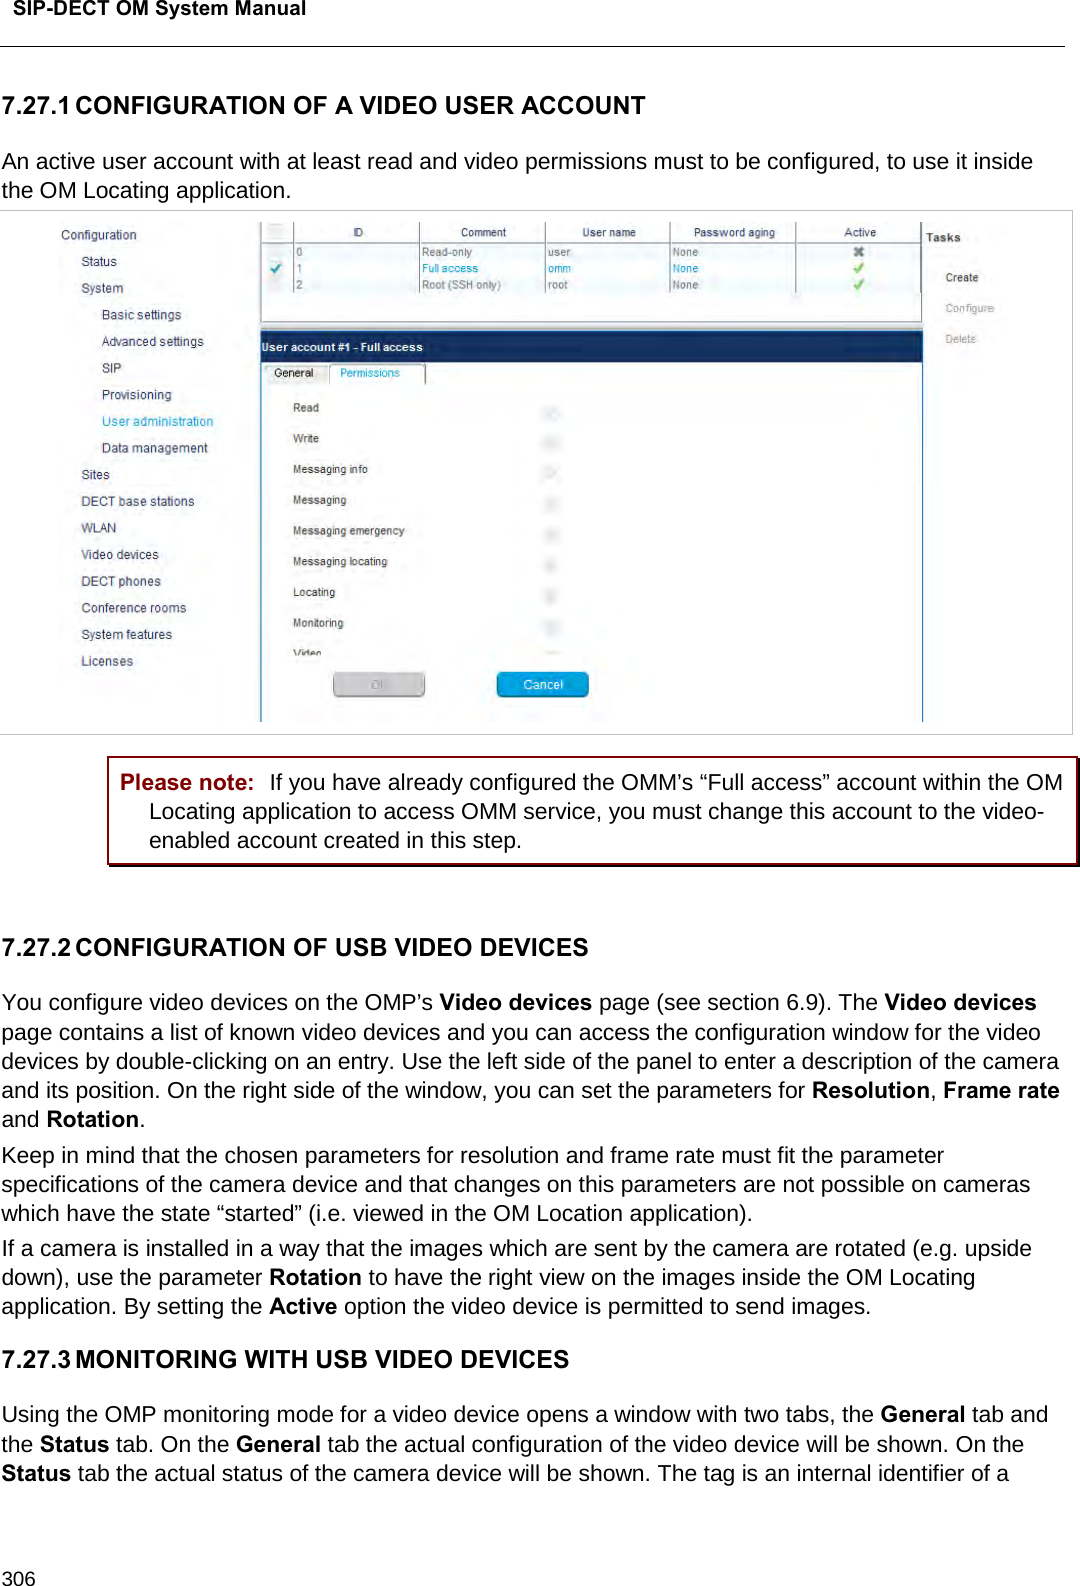  SIP-DECT OM System Manual    306 7.27.1 CONFIGURATION OF A VIDEO USER ACCOUNT An active user account with at least read and video permissions must to be configured, to use it inside the OM Locating application.  Please note: If you have already configured the OMM’s “Full access” account within the OM Locating application to access OMM service, you must change this account to the video-enabled account created in this step.  7.27.2 CONFIGURATION OF USB VIDEO DEVICES You configure video devices on the OMP’s Video devices page (see section 6.9). The Video devices page contains a list of known video devices and you can access the configuration window for the video devices by double-clicking on an entry. Use the left side of the panel to enter a description of the camera and its position. On the right side of the window, you can set the parameters for Resolution, Frame rate and Rotation.  Keep in mind that the chosen parameters for resolution and frame rate must fit the parameter specifications of the camera device and that changes on this parameters are not possible on cameras which have the state “started” (i.e. viewed in the OM Location application).  If a camera is installed in a way that the images which are sent by the camera are rotated (e.g. upside down), use the parameter Rotation to have the right view on the images inside the OM Locating application. By setting the Active option the video device is permitted to send images. 7.27.3 MONITORING WITH USB VIDEO DEVICES Using the OMP monitoring mode for a video device opens a window with two tabs, the General tab and the Status tab. On the General tab the actual configuration of the video device will be shown. On the Status tab the actual status of the camera device will be shown. The tag is an internal identifier of a 